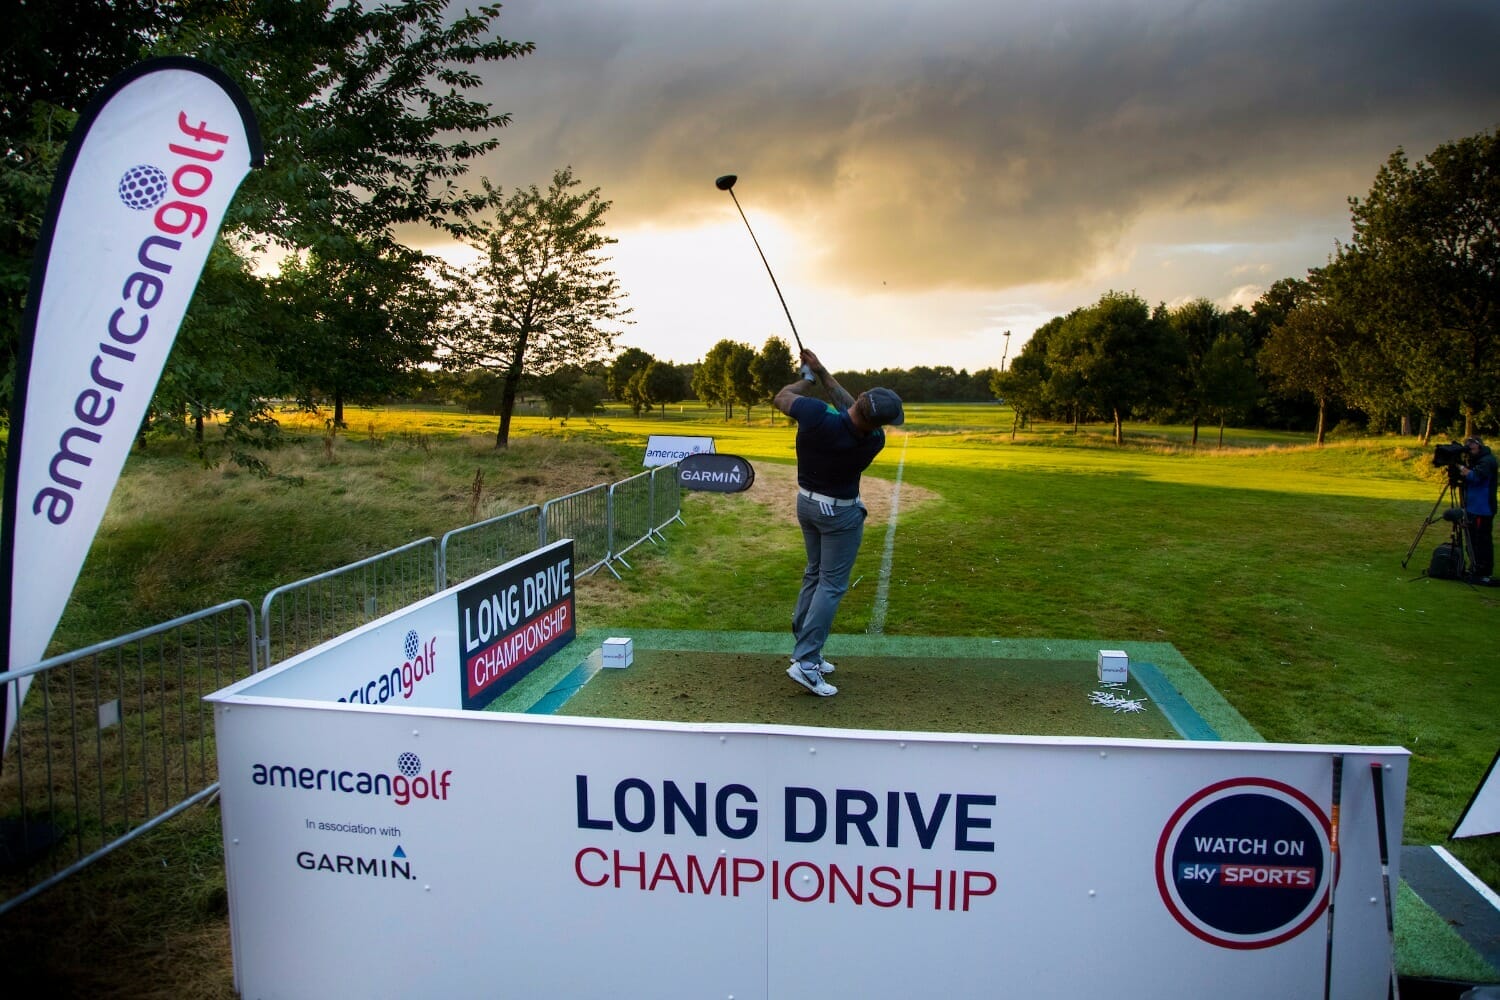 Enter the American Golf long drive in store this weekend